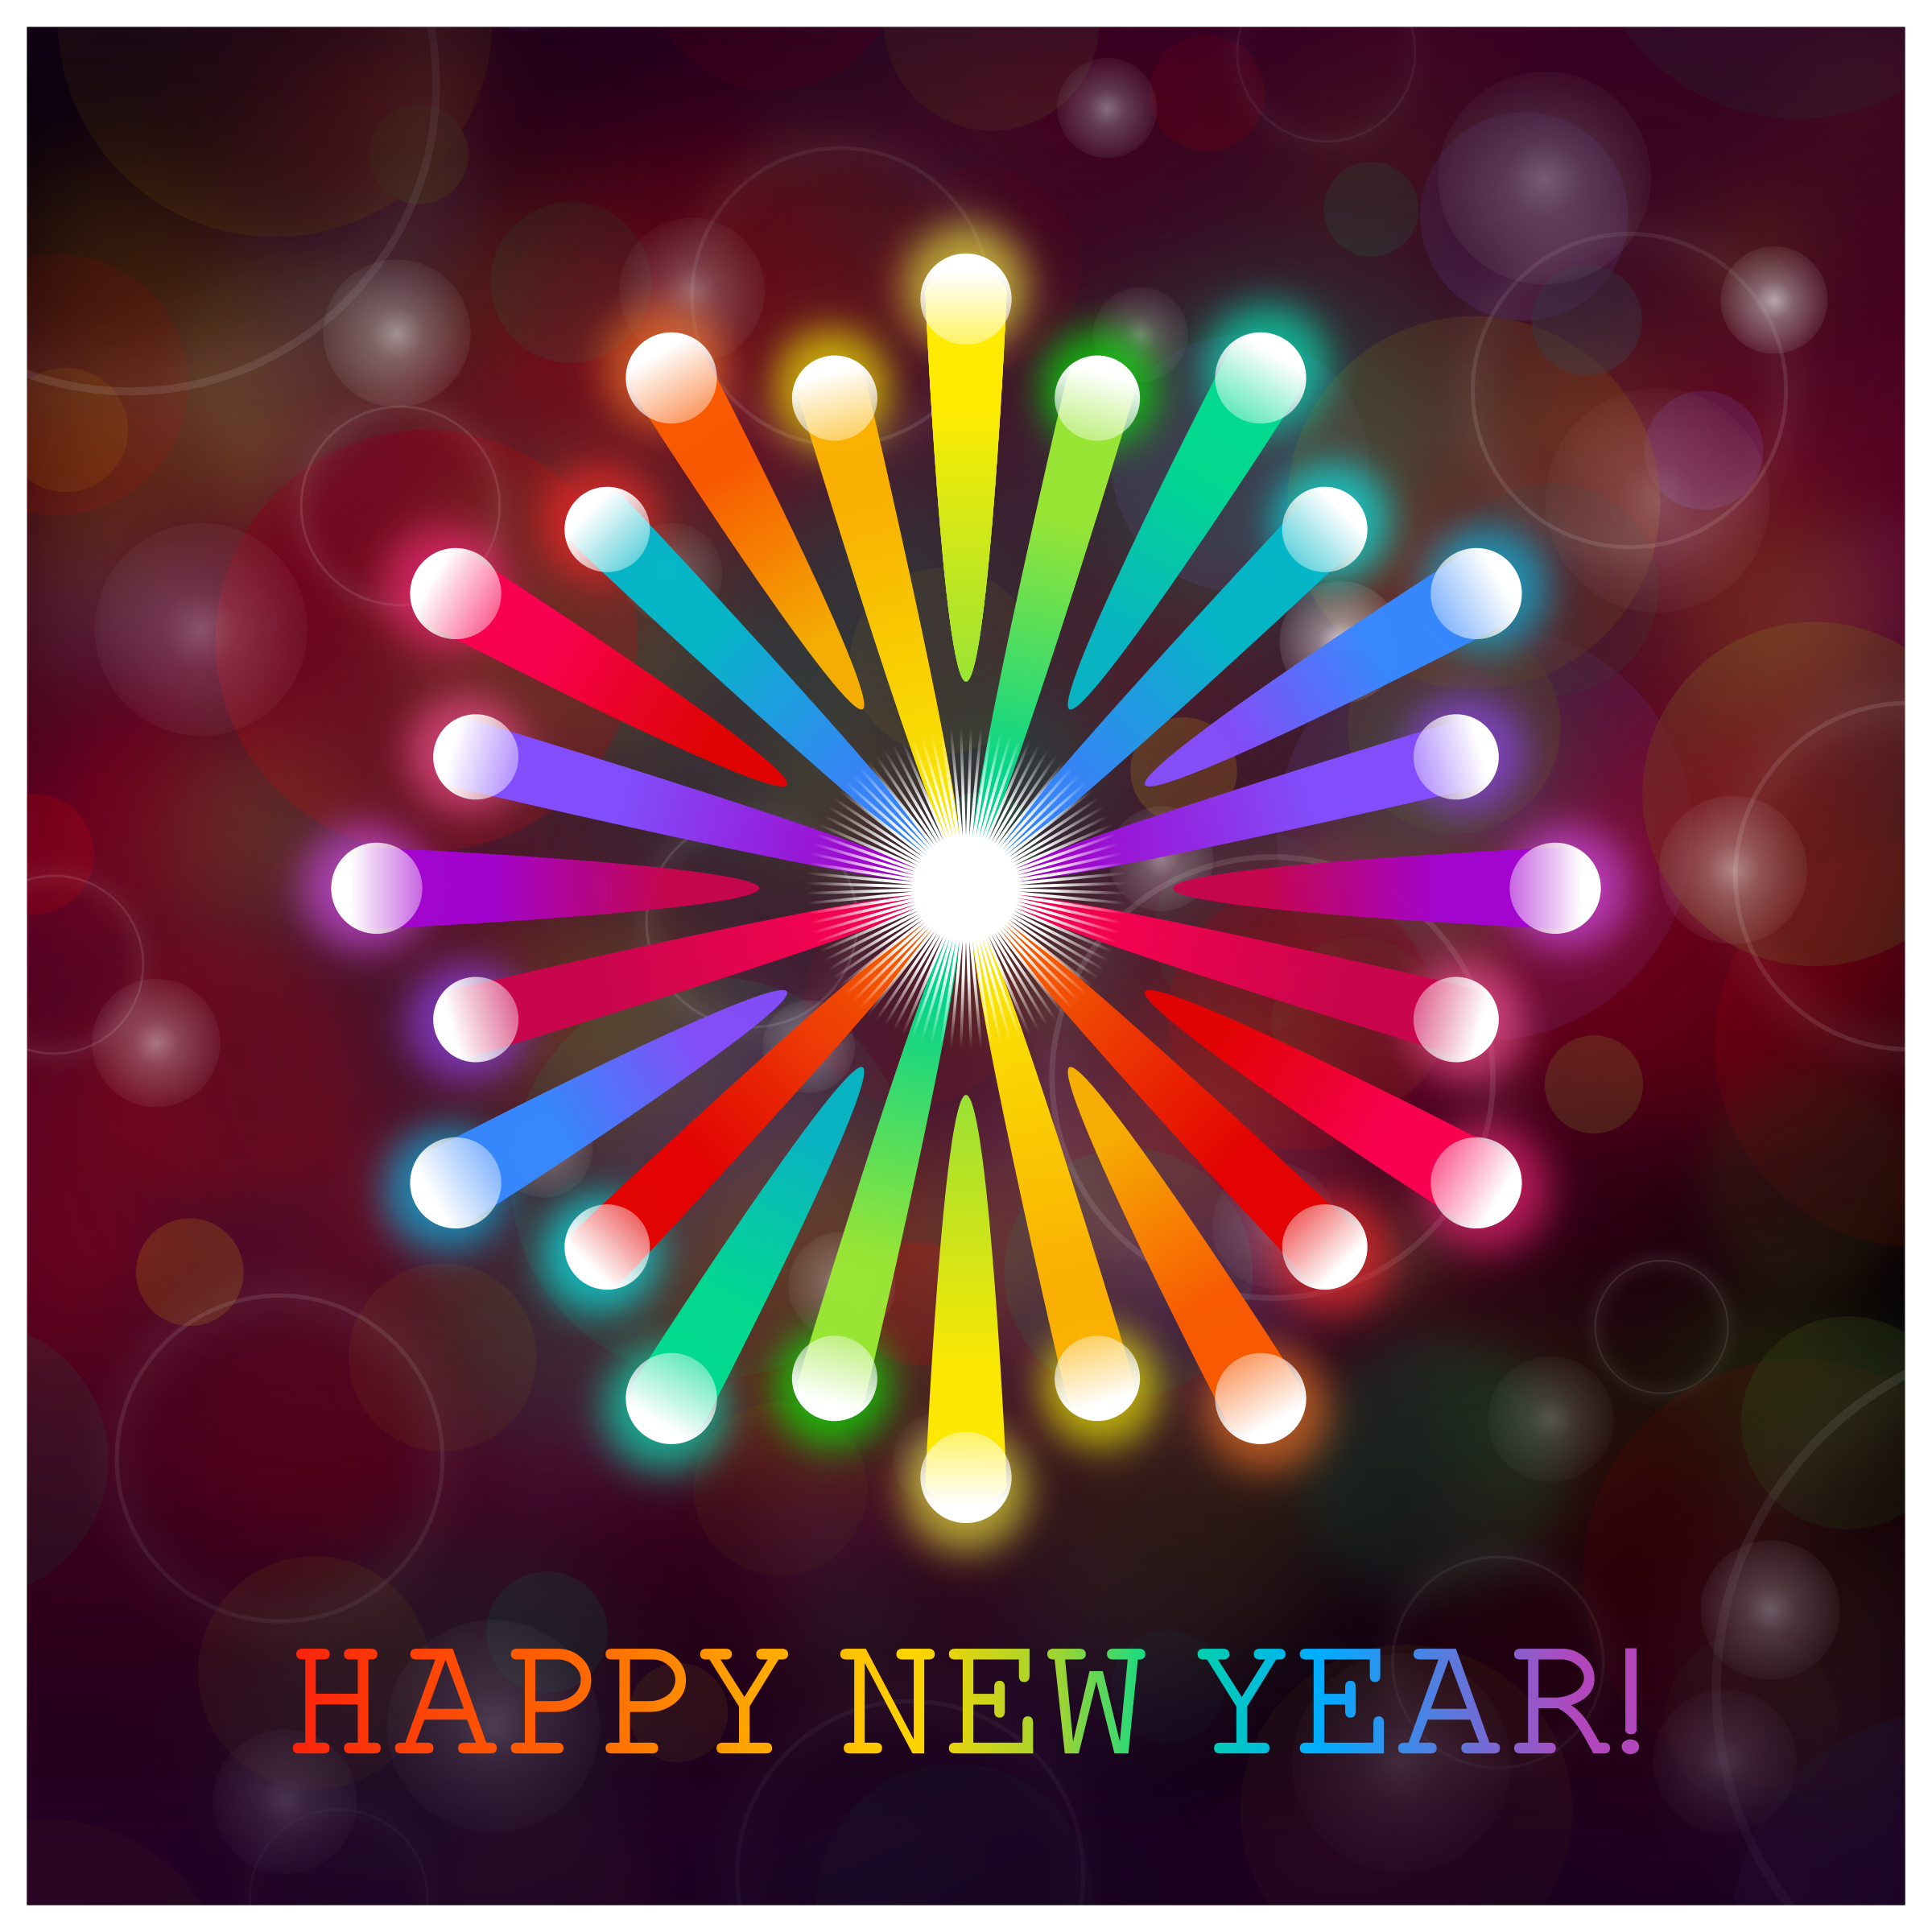 microsoft office clipart new year - photo #44